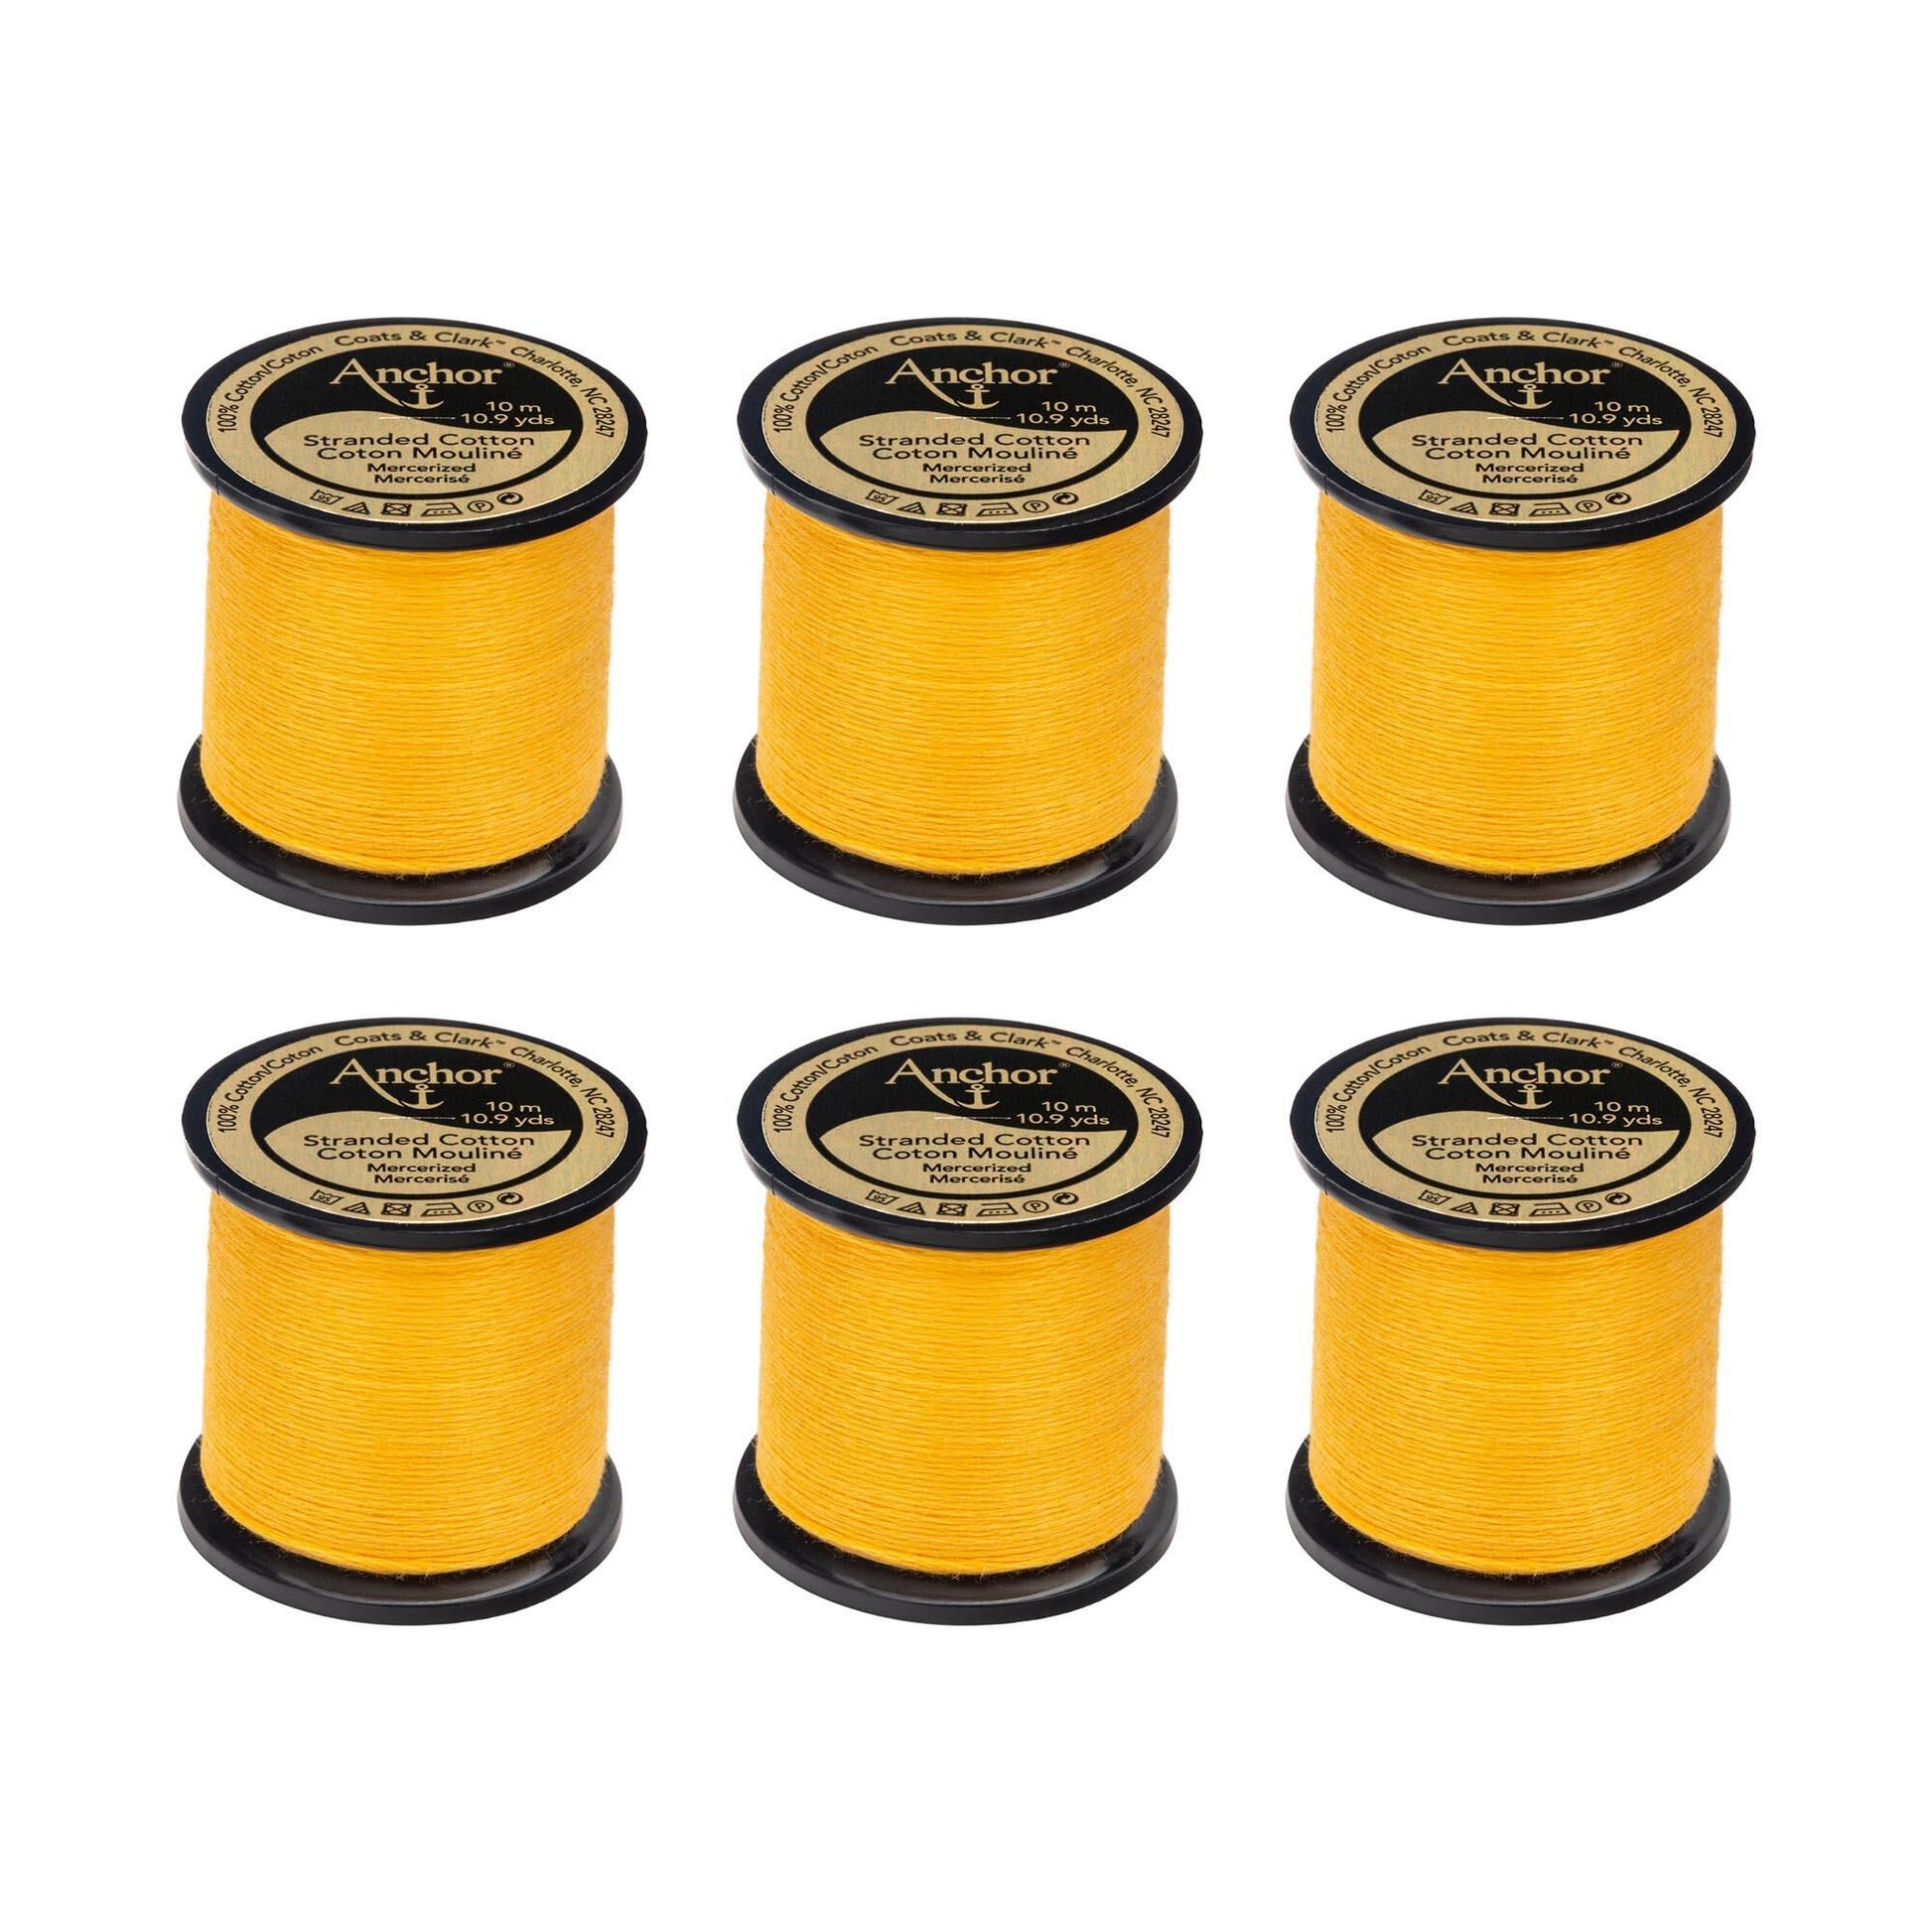 Anchor Spooled Floss 10 Meters (6 Pack) 2 | Yarnspirations